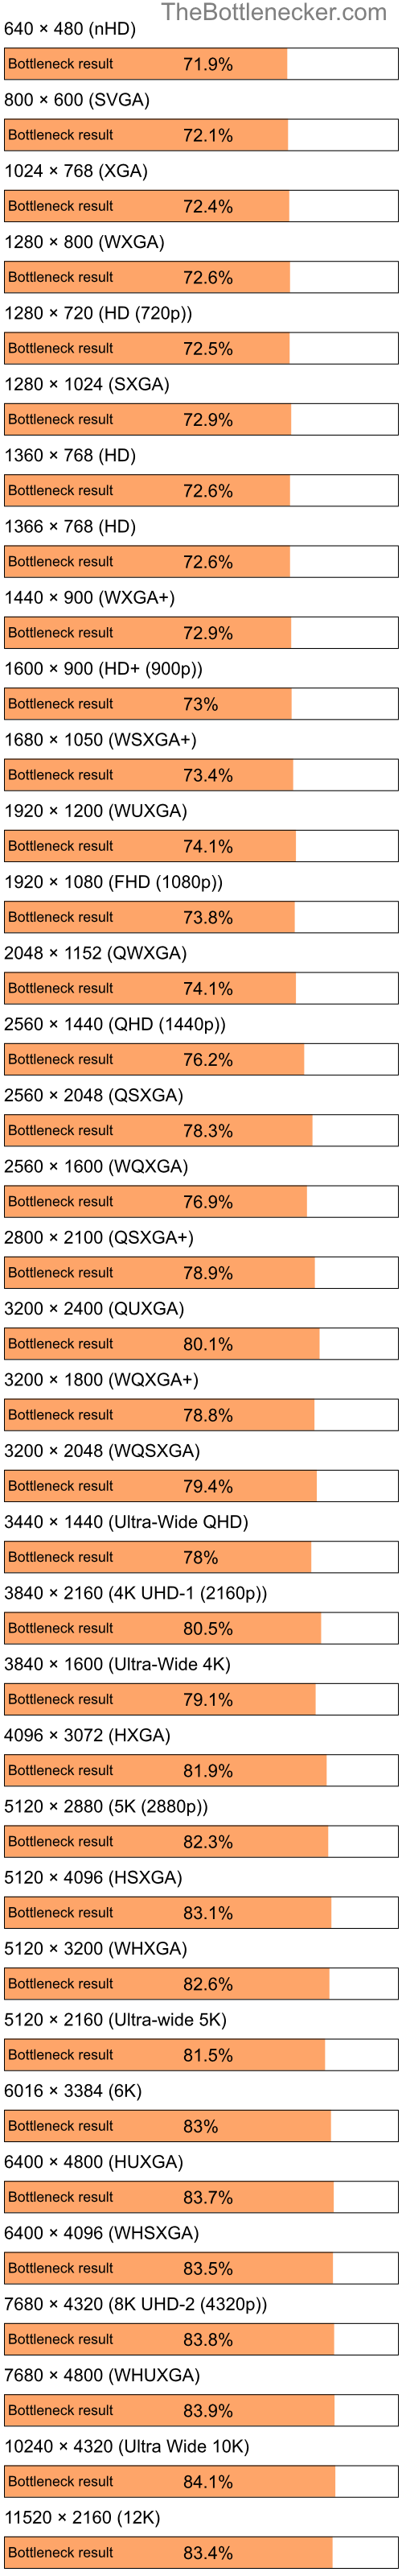 Bottleneck results by resolution for Intel Pentium 4 and NVIDIA GeForce 6600 in Graphic Card Intense Tasks